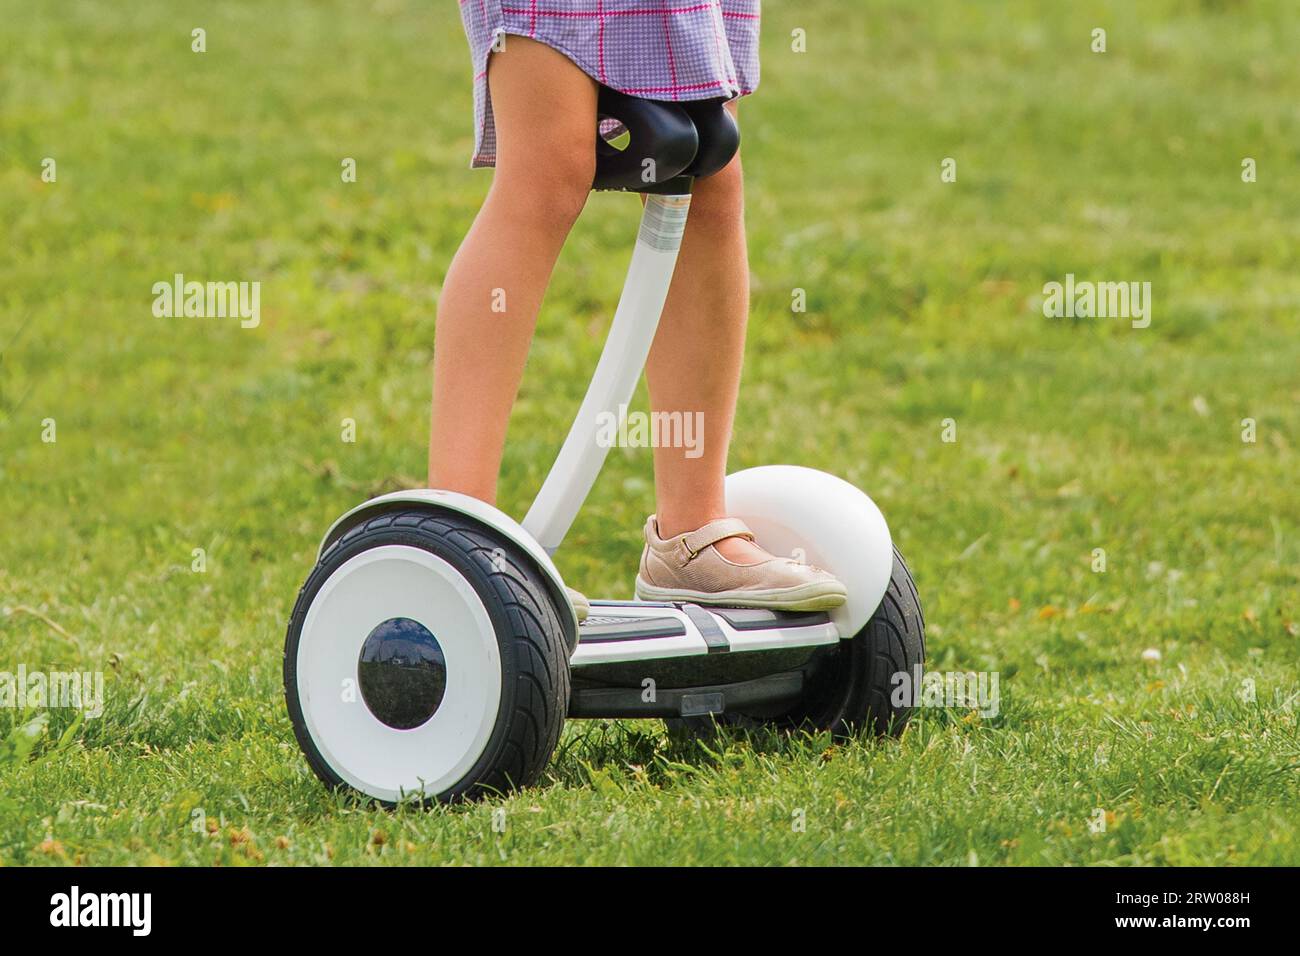 The girl's legs stand and ride on a hoverboard against the background of the grass of the park. Stock Photo